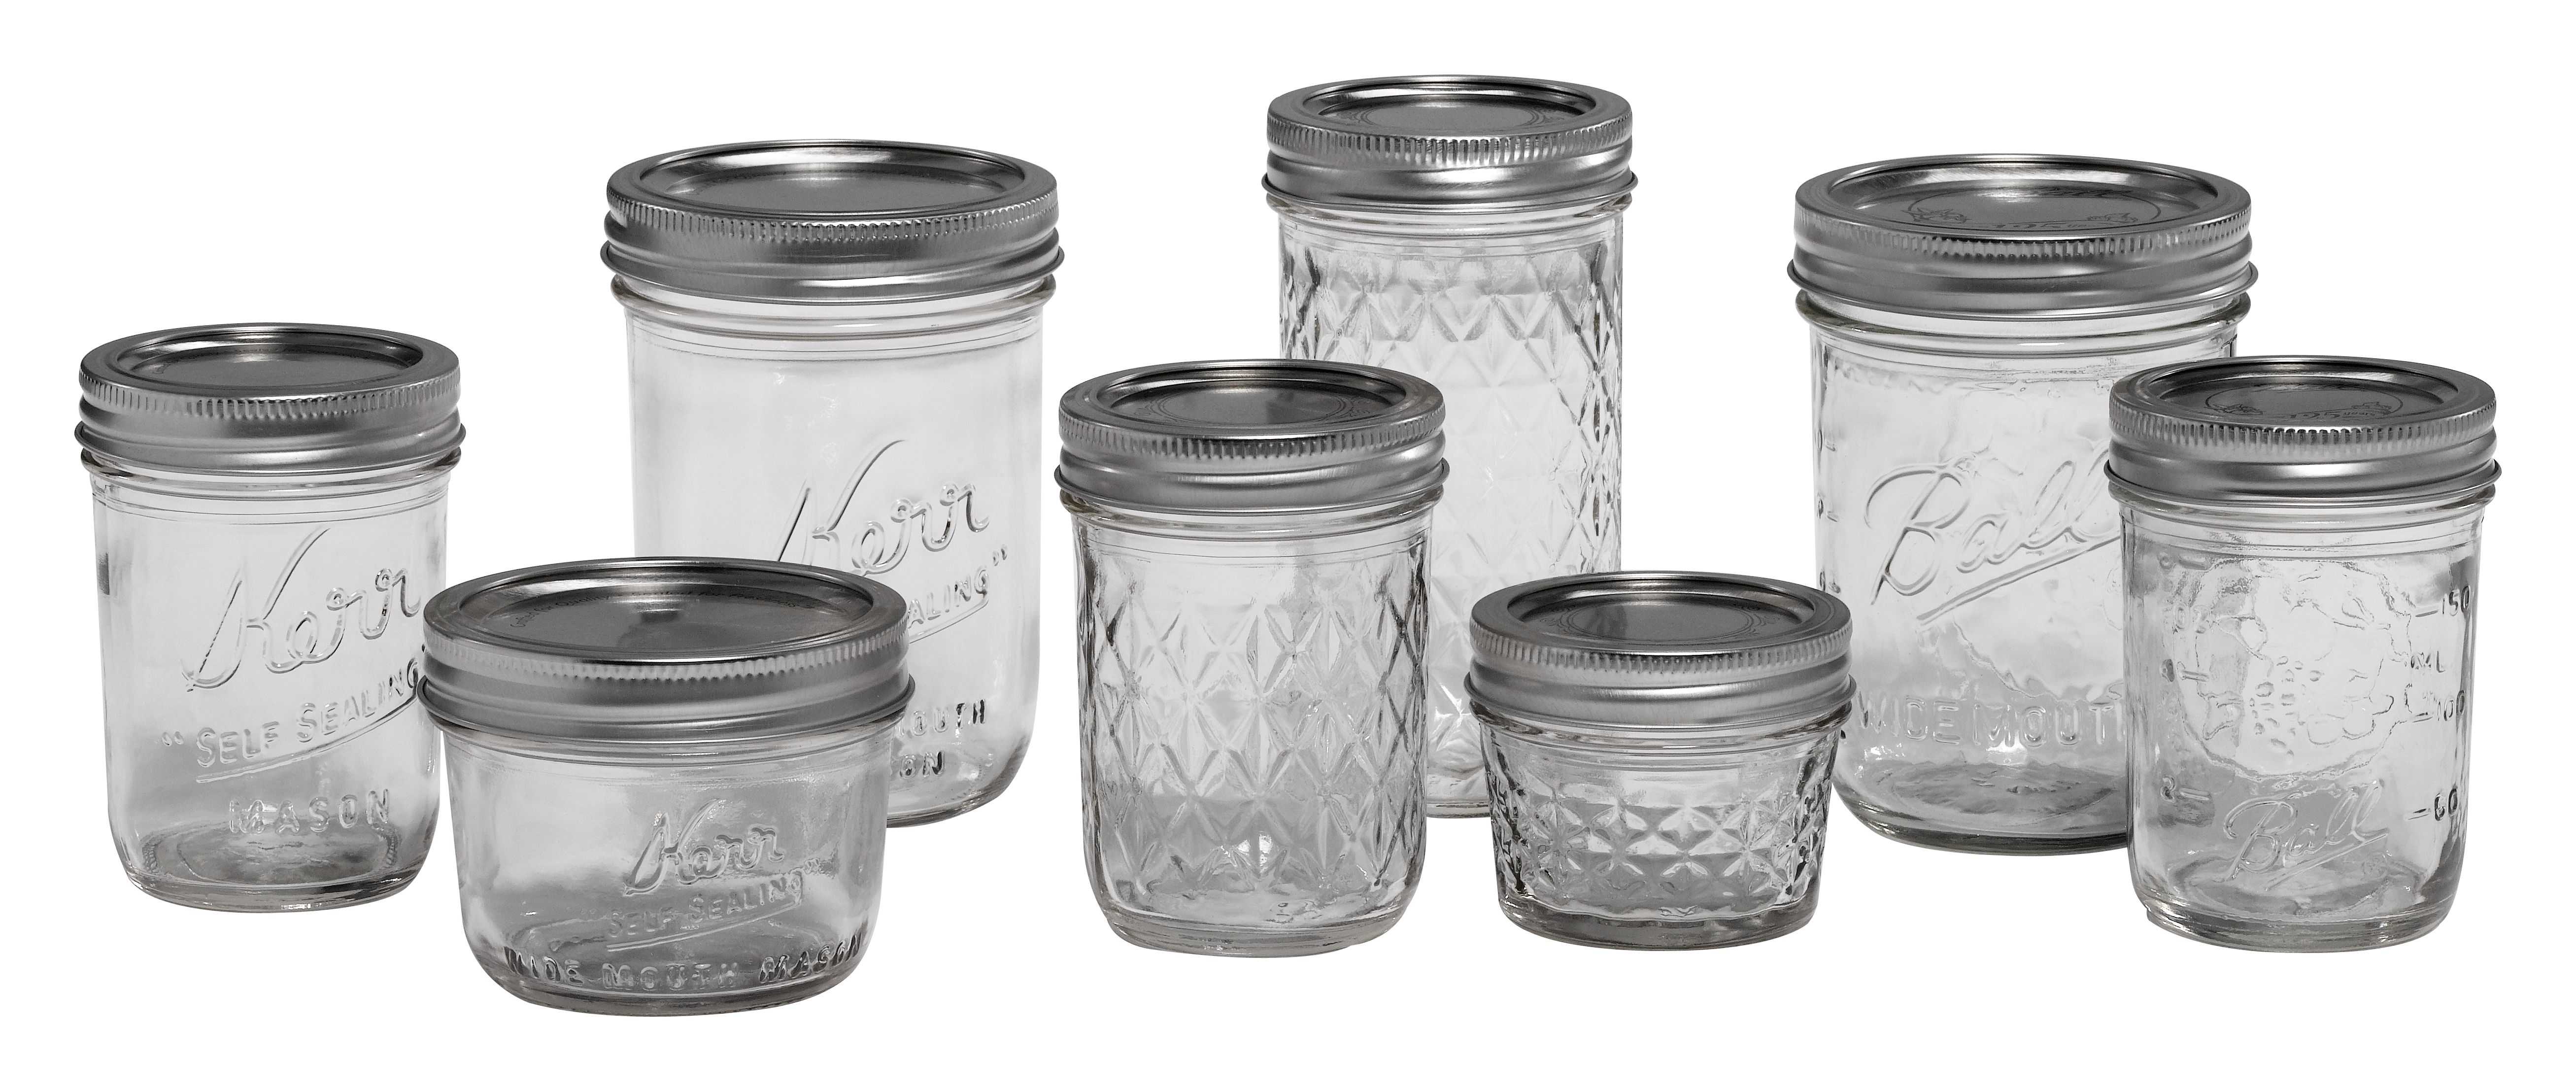 Jar Store - Helping You Select the Perfect Glassware